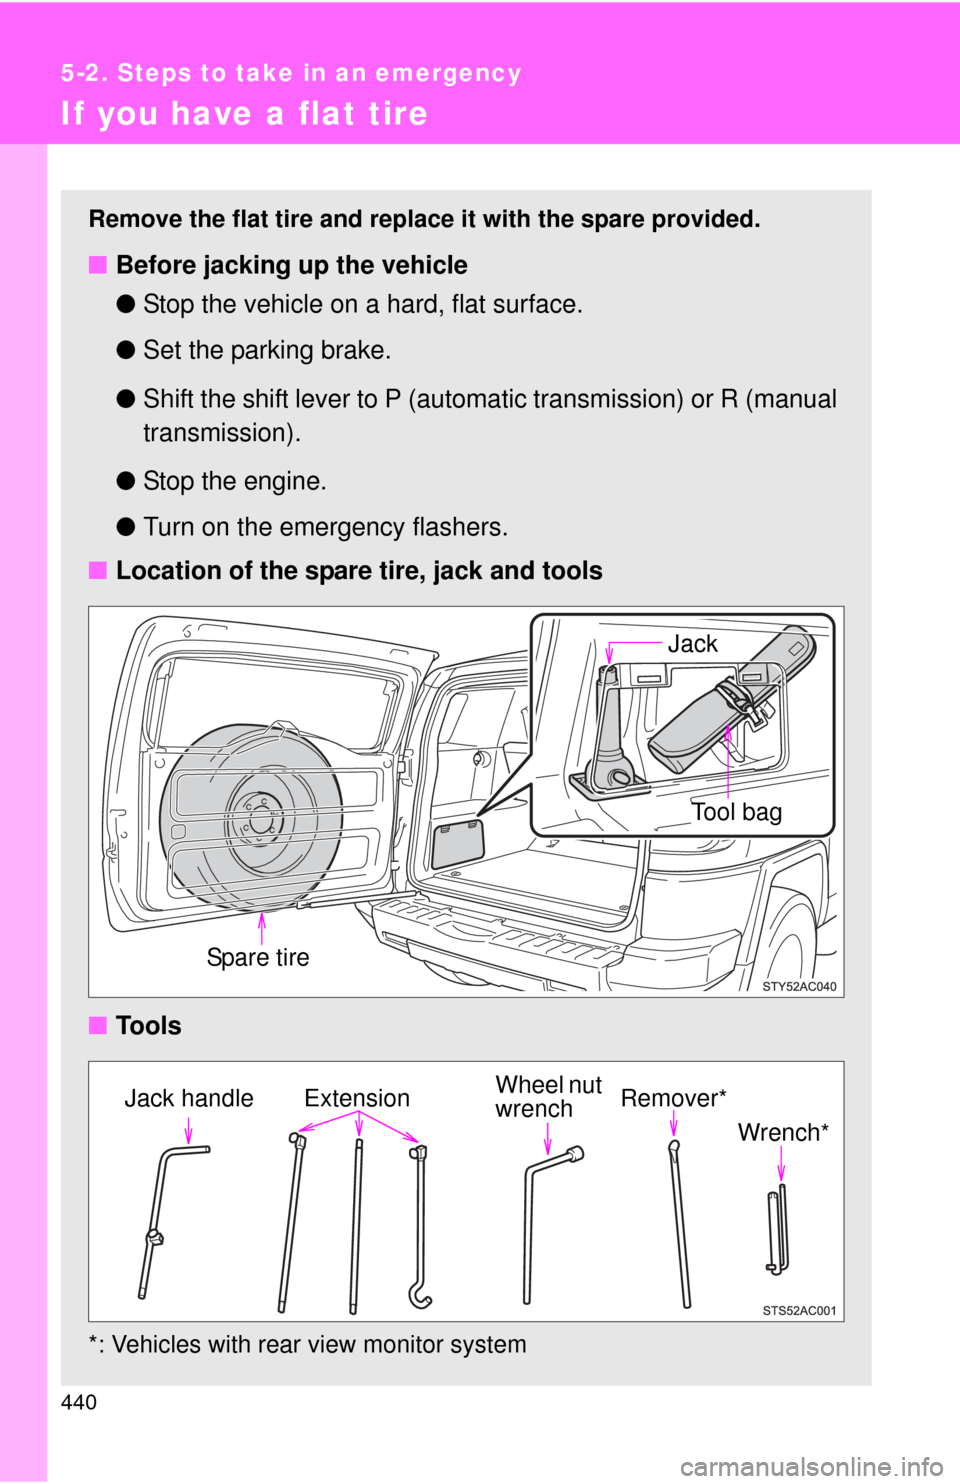 TOYOTA FJ CRUISER 2011 1.G Owners Manual 440
5-2. Steps to take in an emergency
If you have a flat tire
Remove the flat tire and replace it with the spare provided.
■Before jacking up the vehicle
●Stop the vehicle on a hard, flat surface